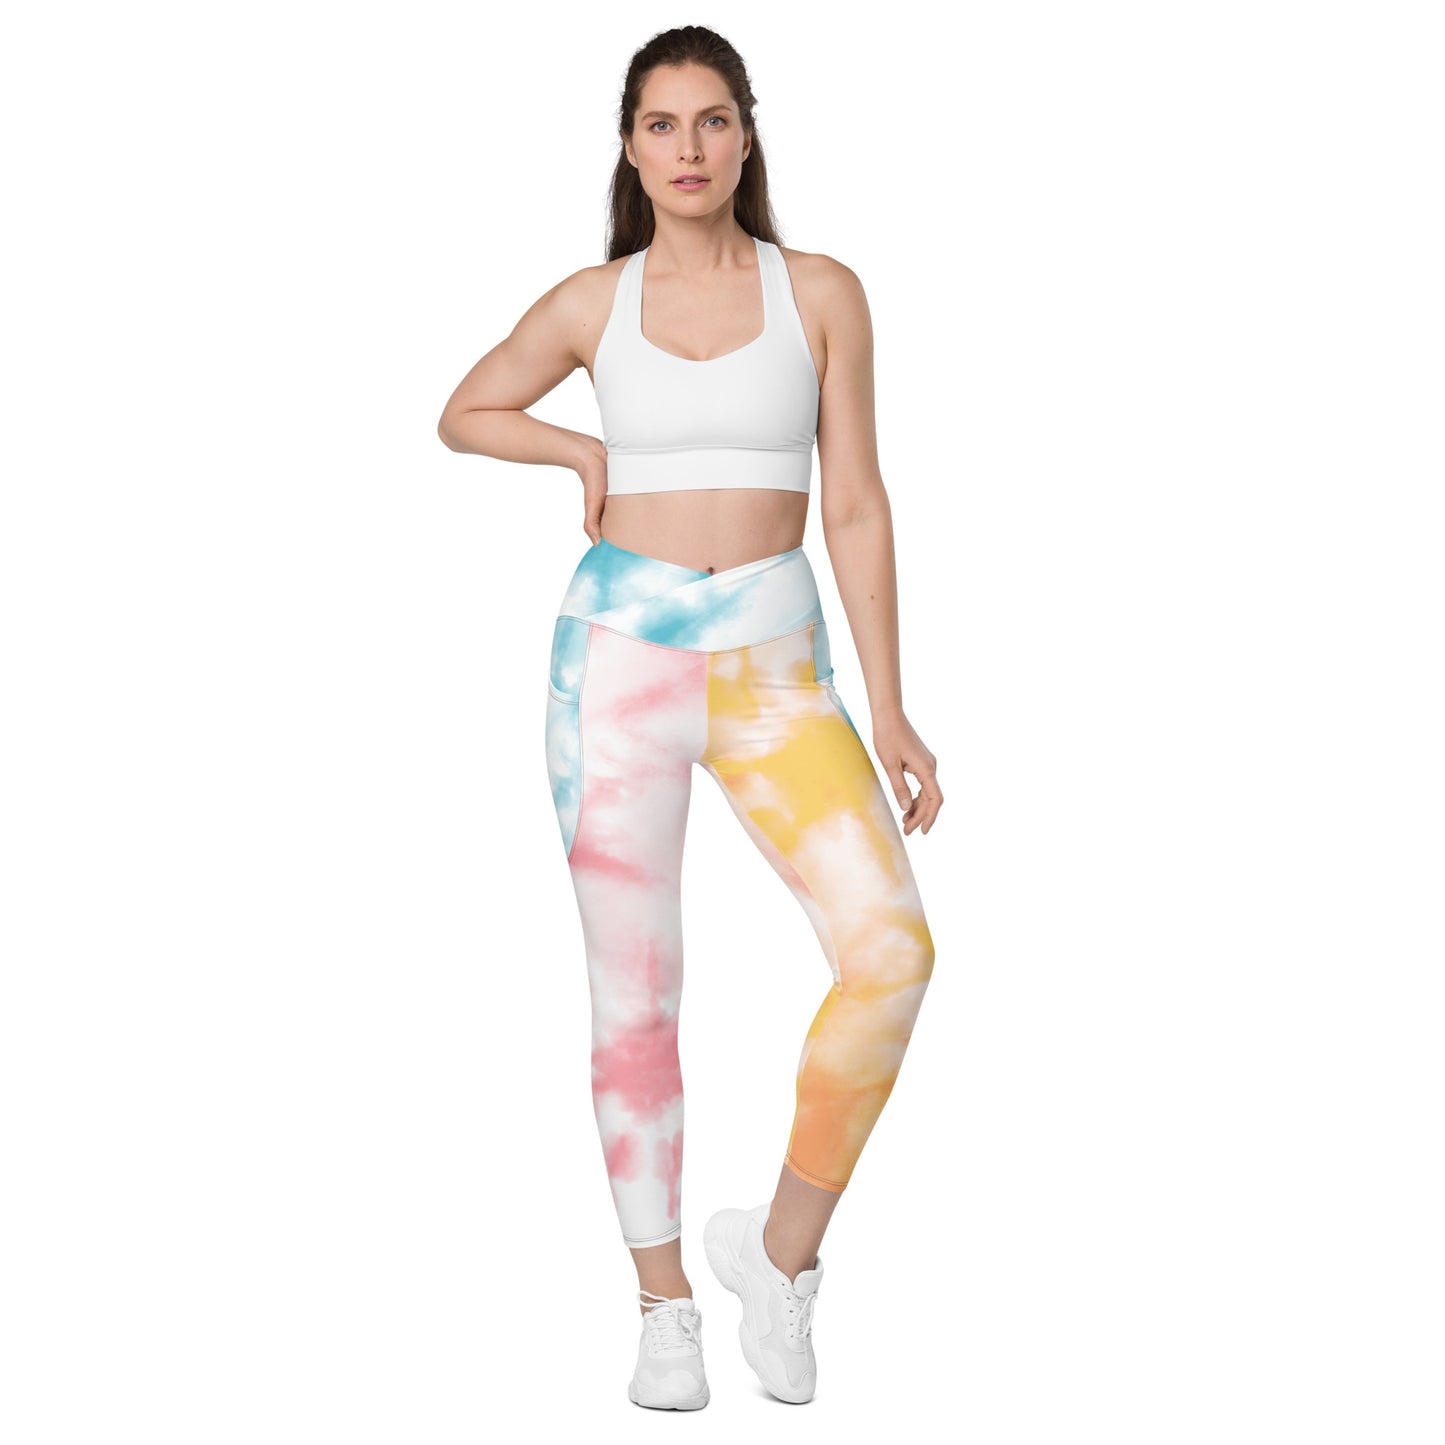 Tie and Dye High-waist Crossover leggings with pockets - Blue and Yellow